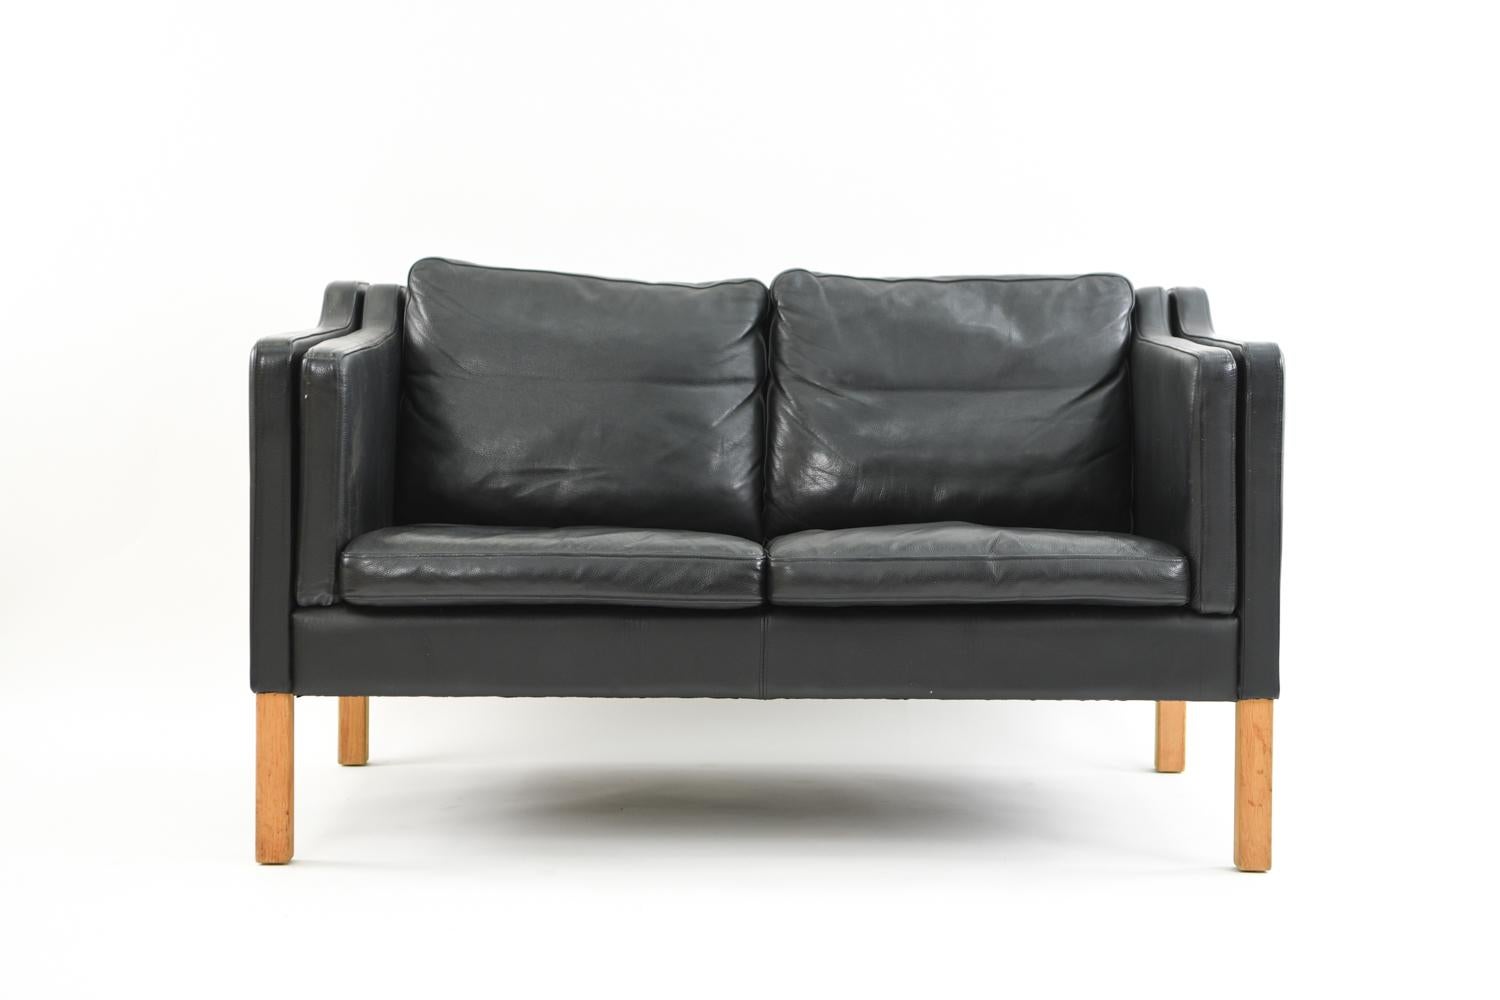 The sofa suite includes a two-seat loveseat and three-seat sofa manufactured by Skipper Furniture AB. These sofas are model Eton by O&M Design, and have a timeless design reminiscent of Borge Mogensen's Classic midcentury seating.